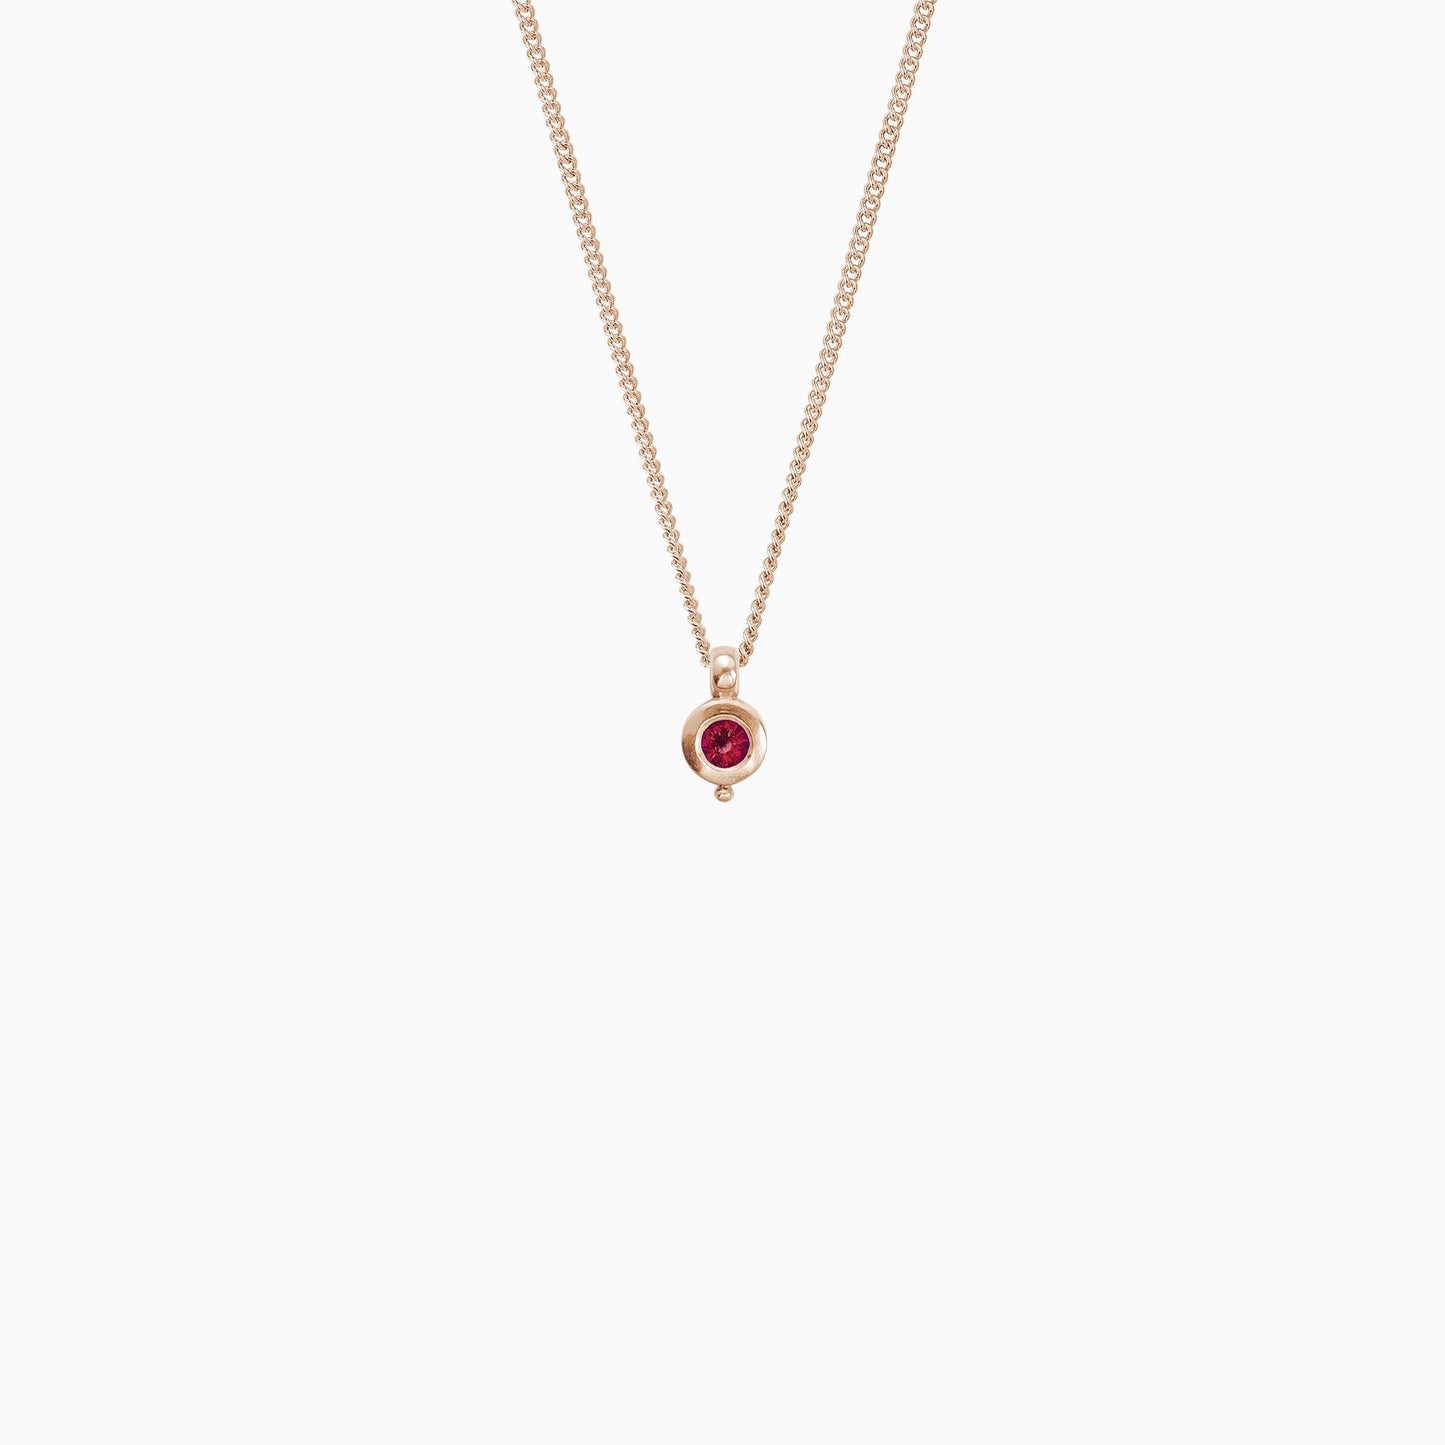 18ct Fairtrade rose gold round pendant 12mm  x 7mm with small round bead attached below on a 45cm fine curb chain. Set with a 4mm round ruby.